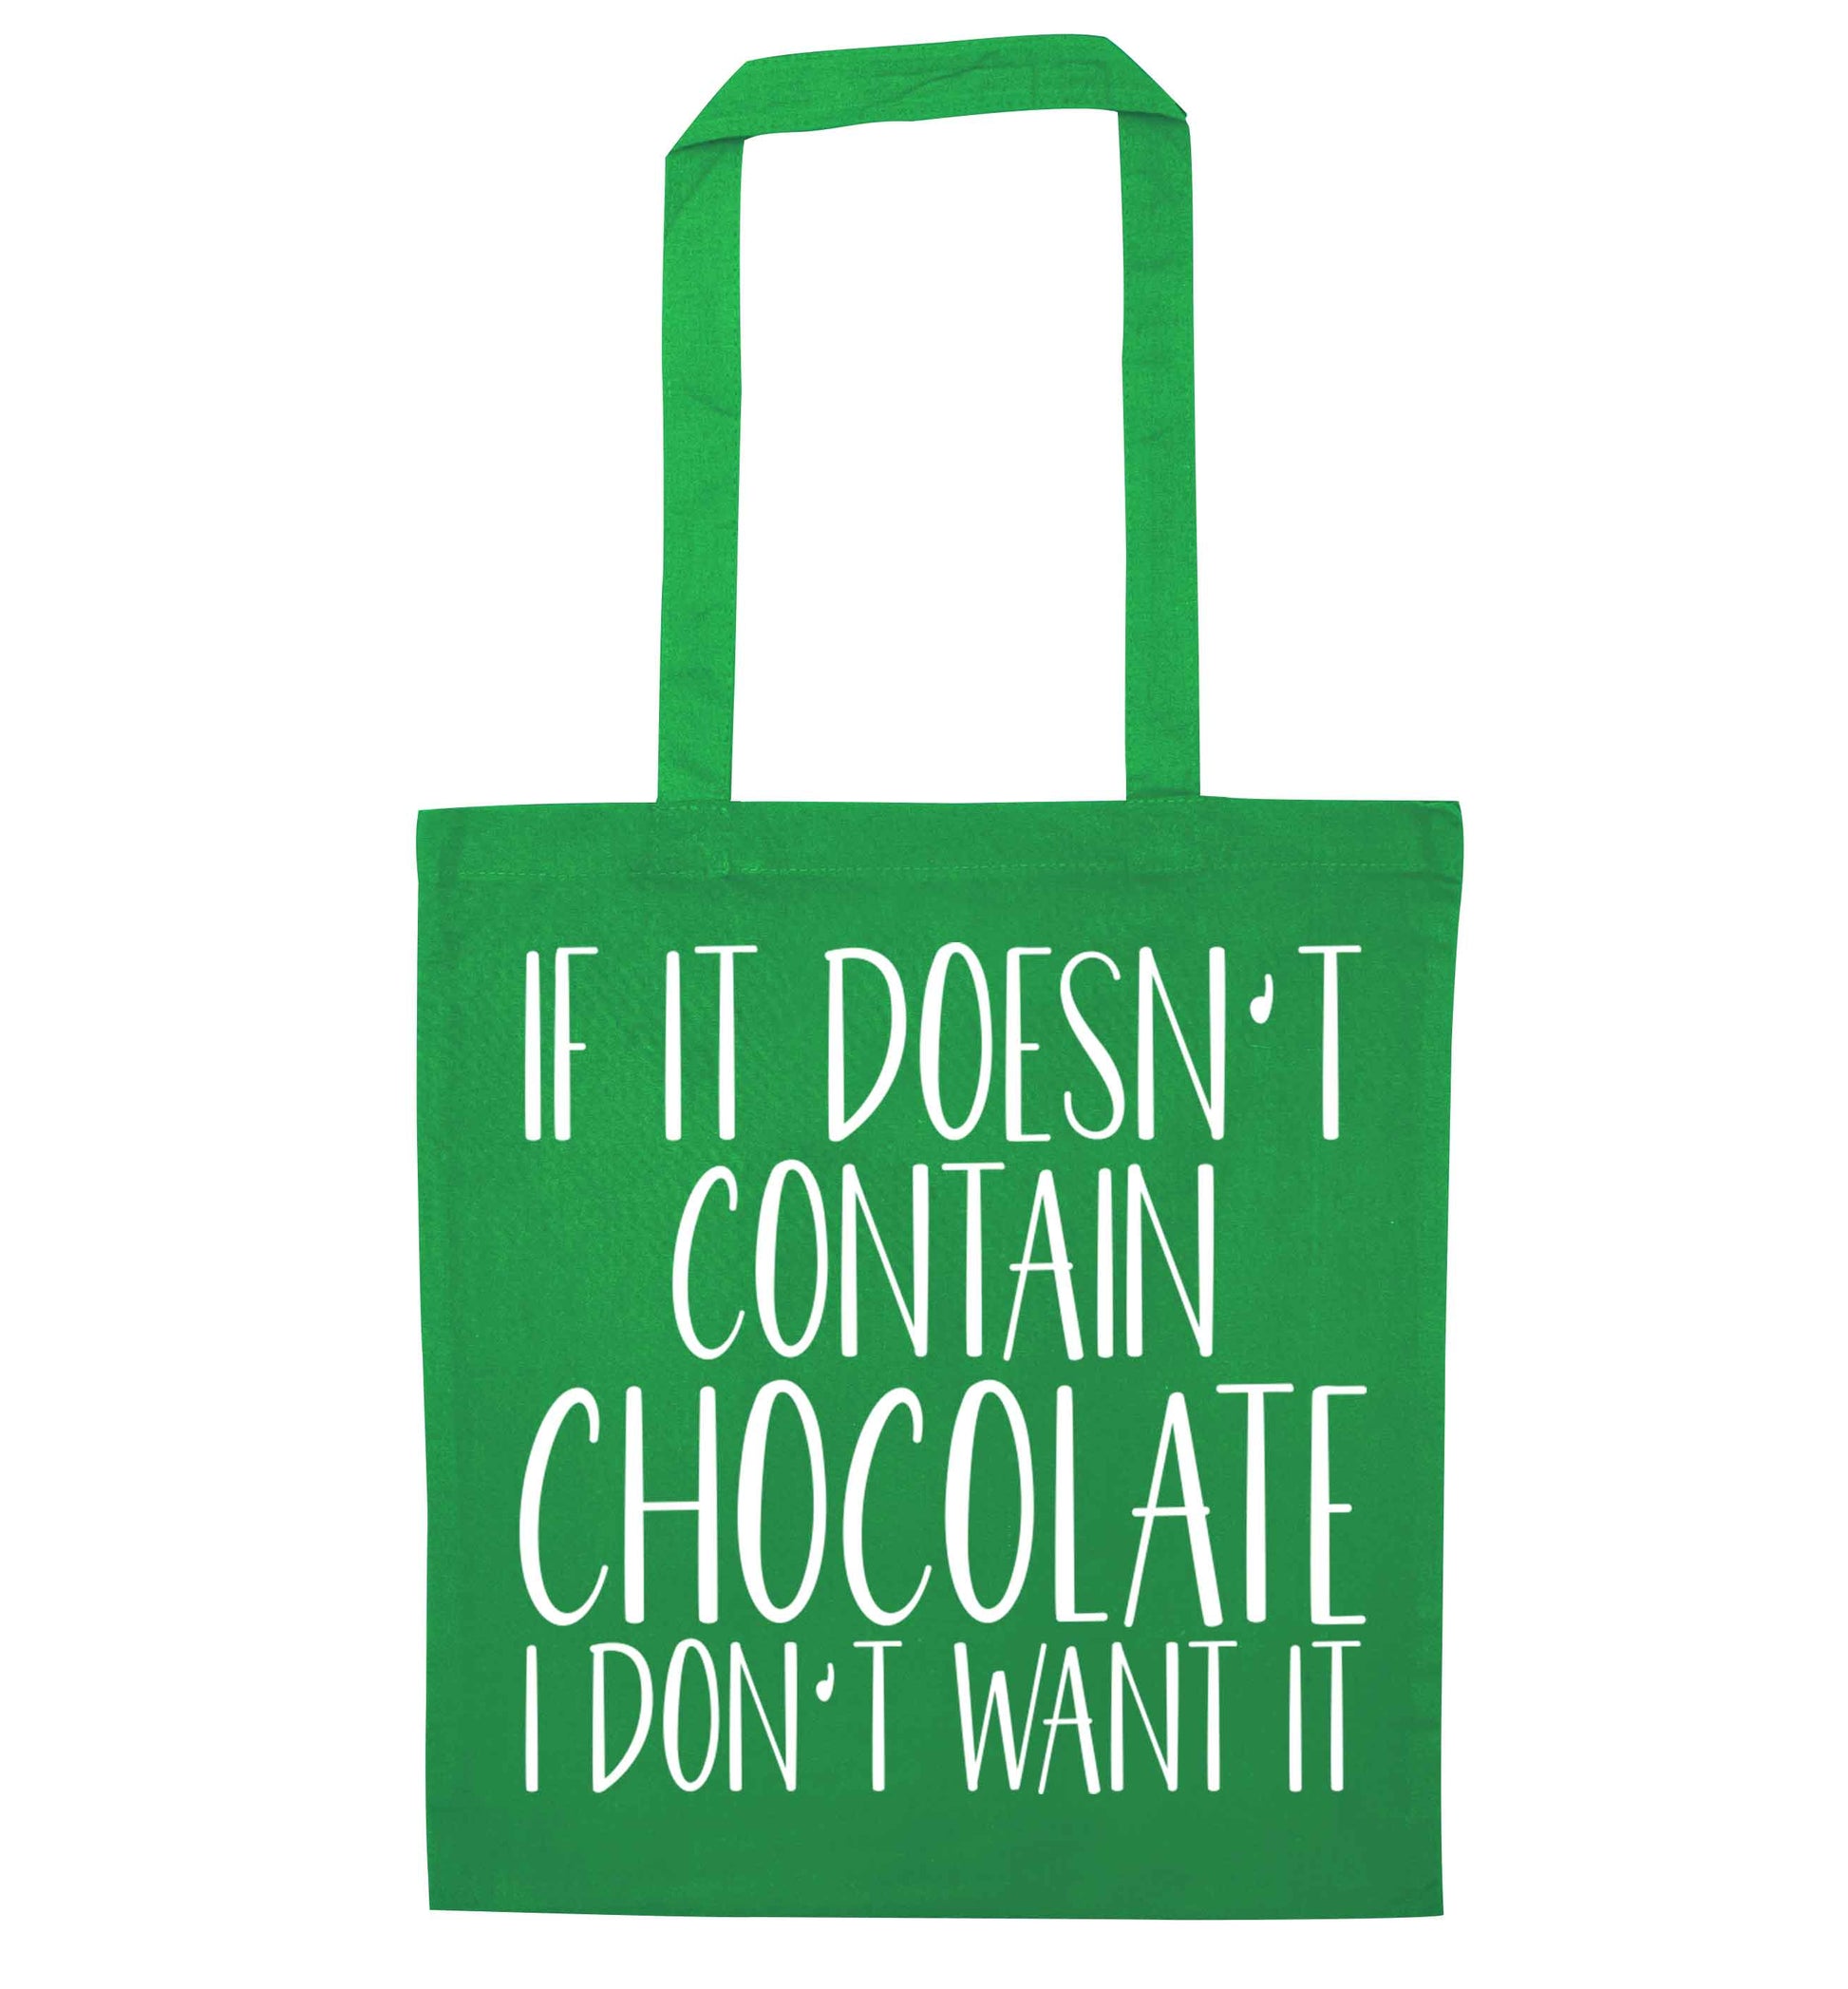 If it doesn't contain chocolate I don't want it green tote bag